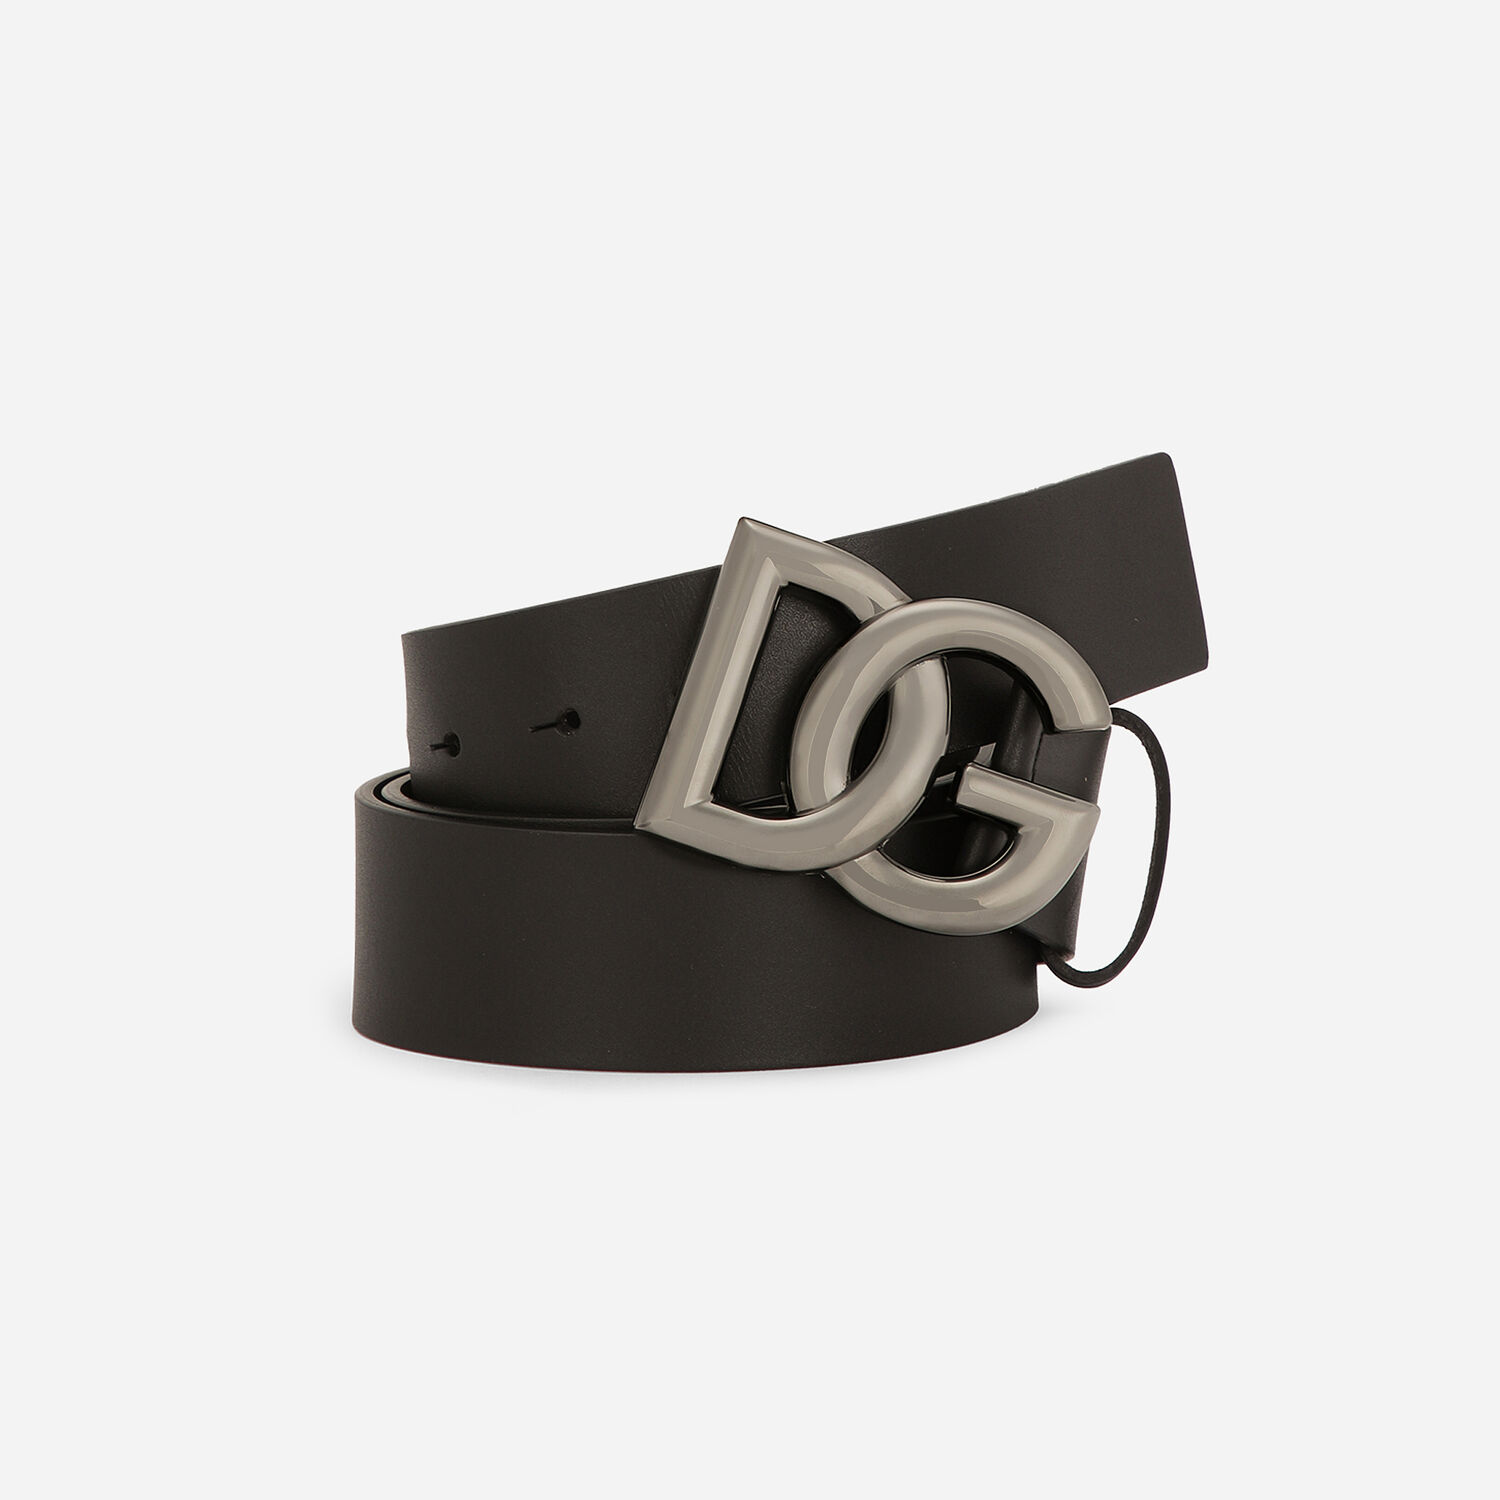 US with Black leather logo belt Lux DG buckle crossover in | Dolce&Gabbana® for